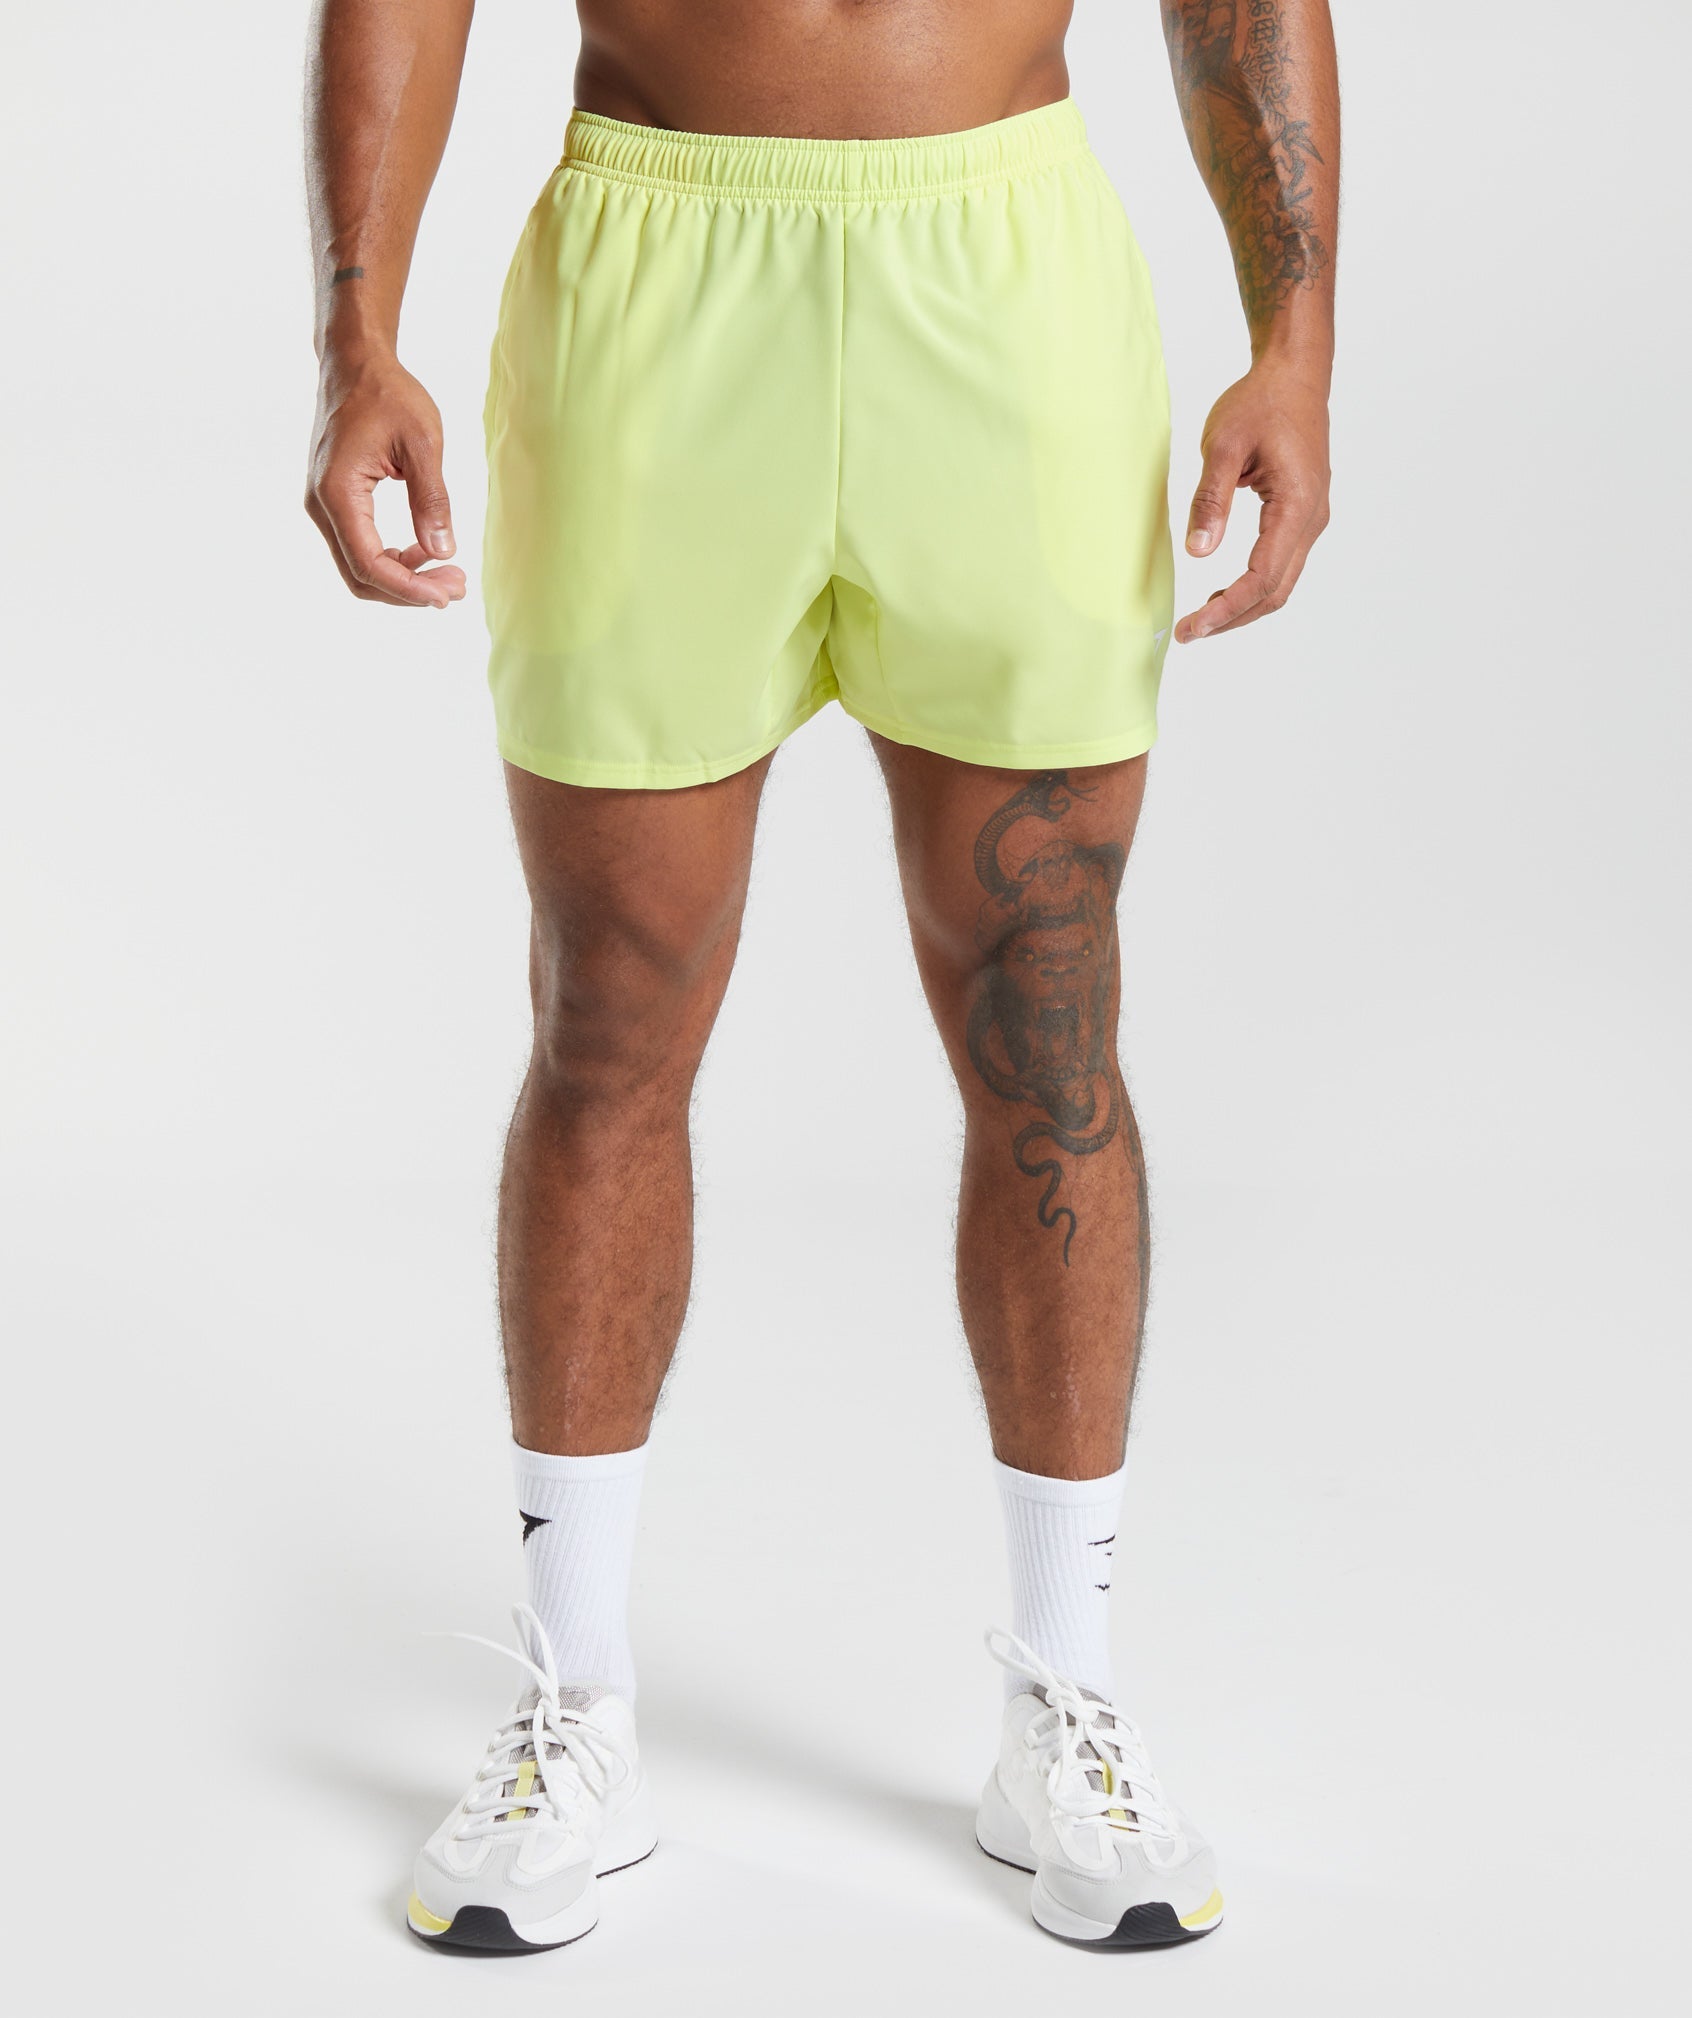 Arrival 5" Shorts in Firefly Green - view 1